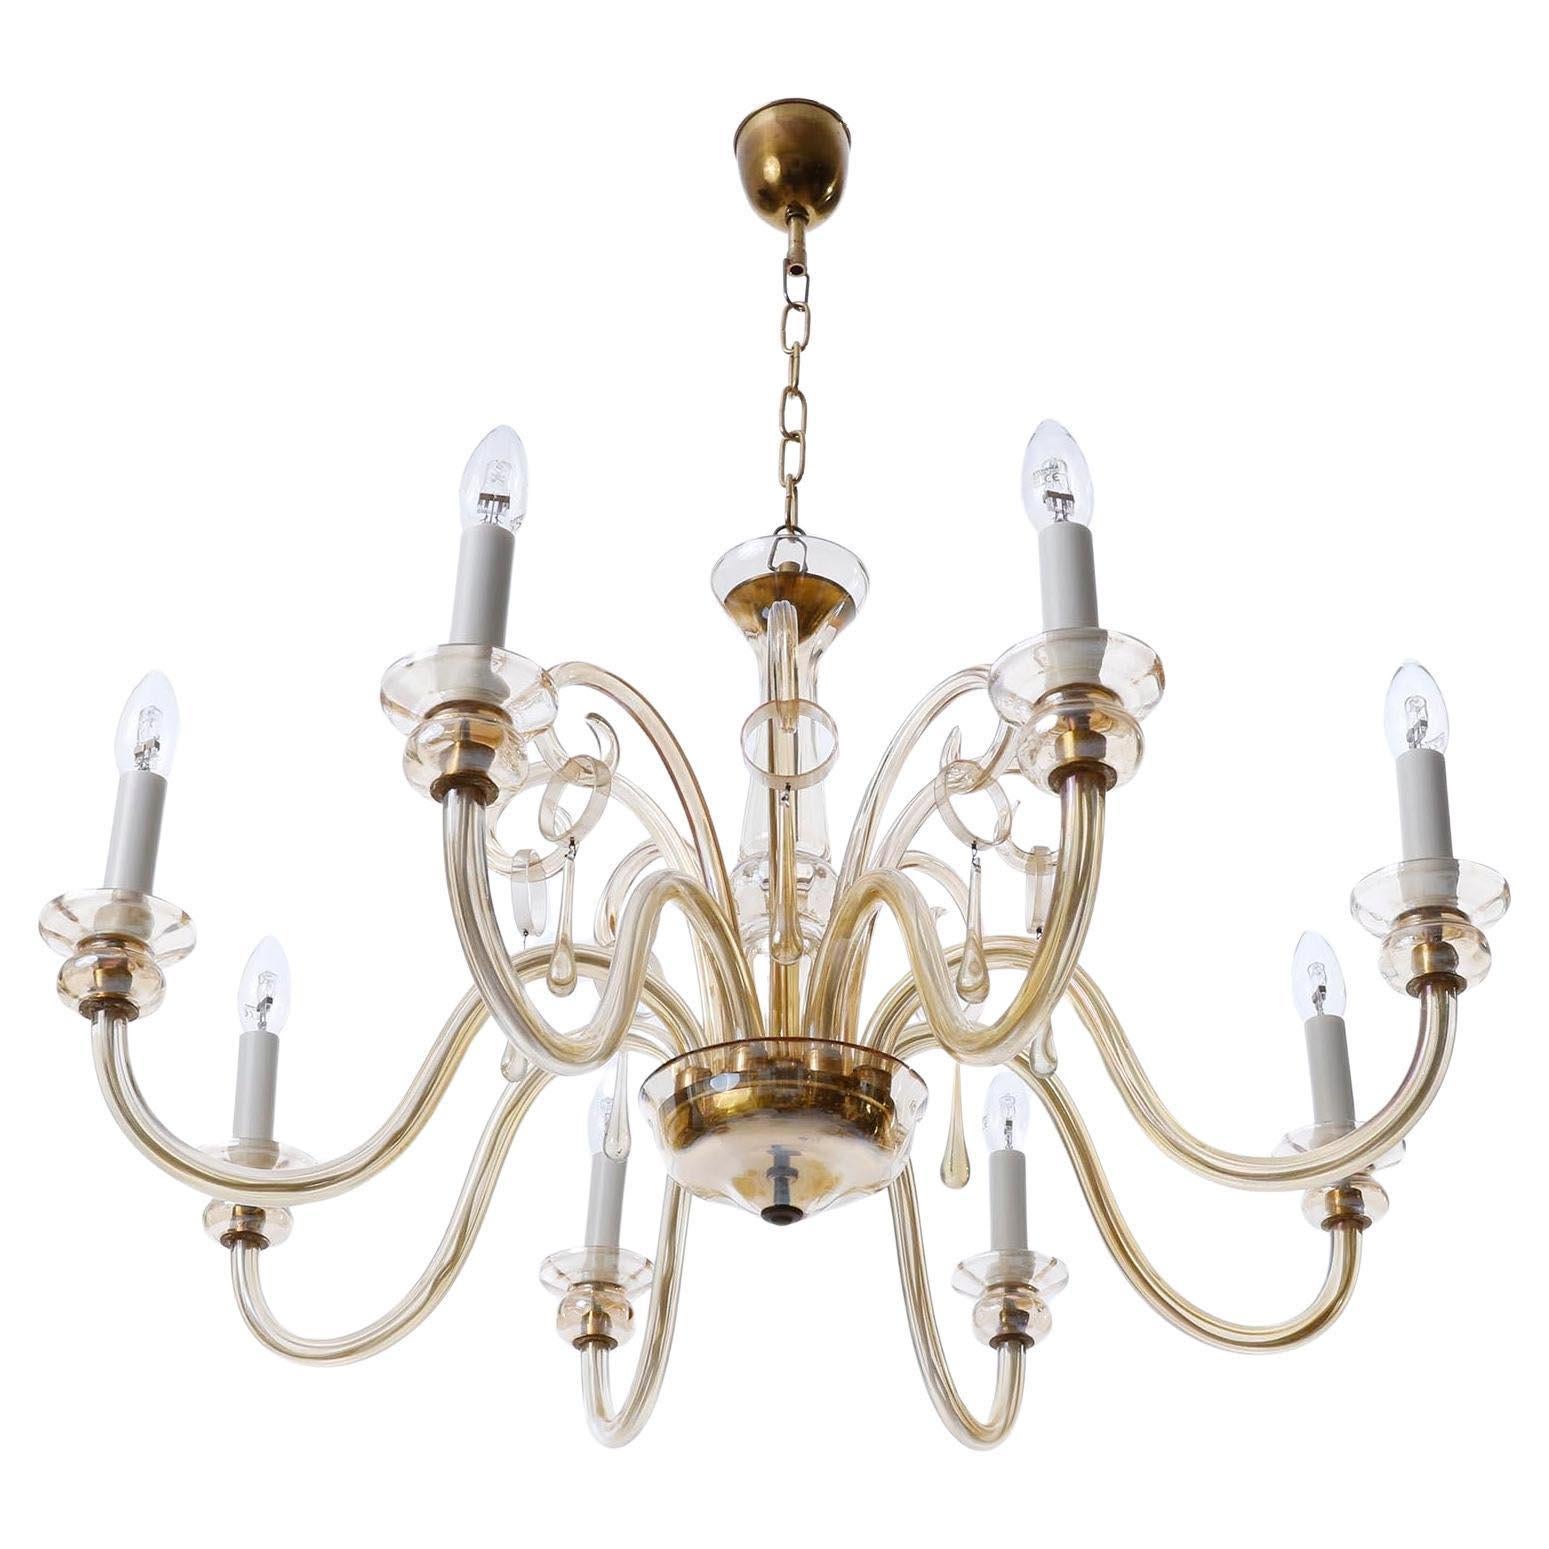 Mid-20th Century Mid-Century Modern Amber Tone Murano Glass Chandelier, Eight Arms, 1960s For Sale